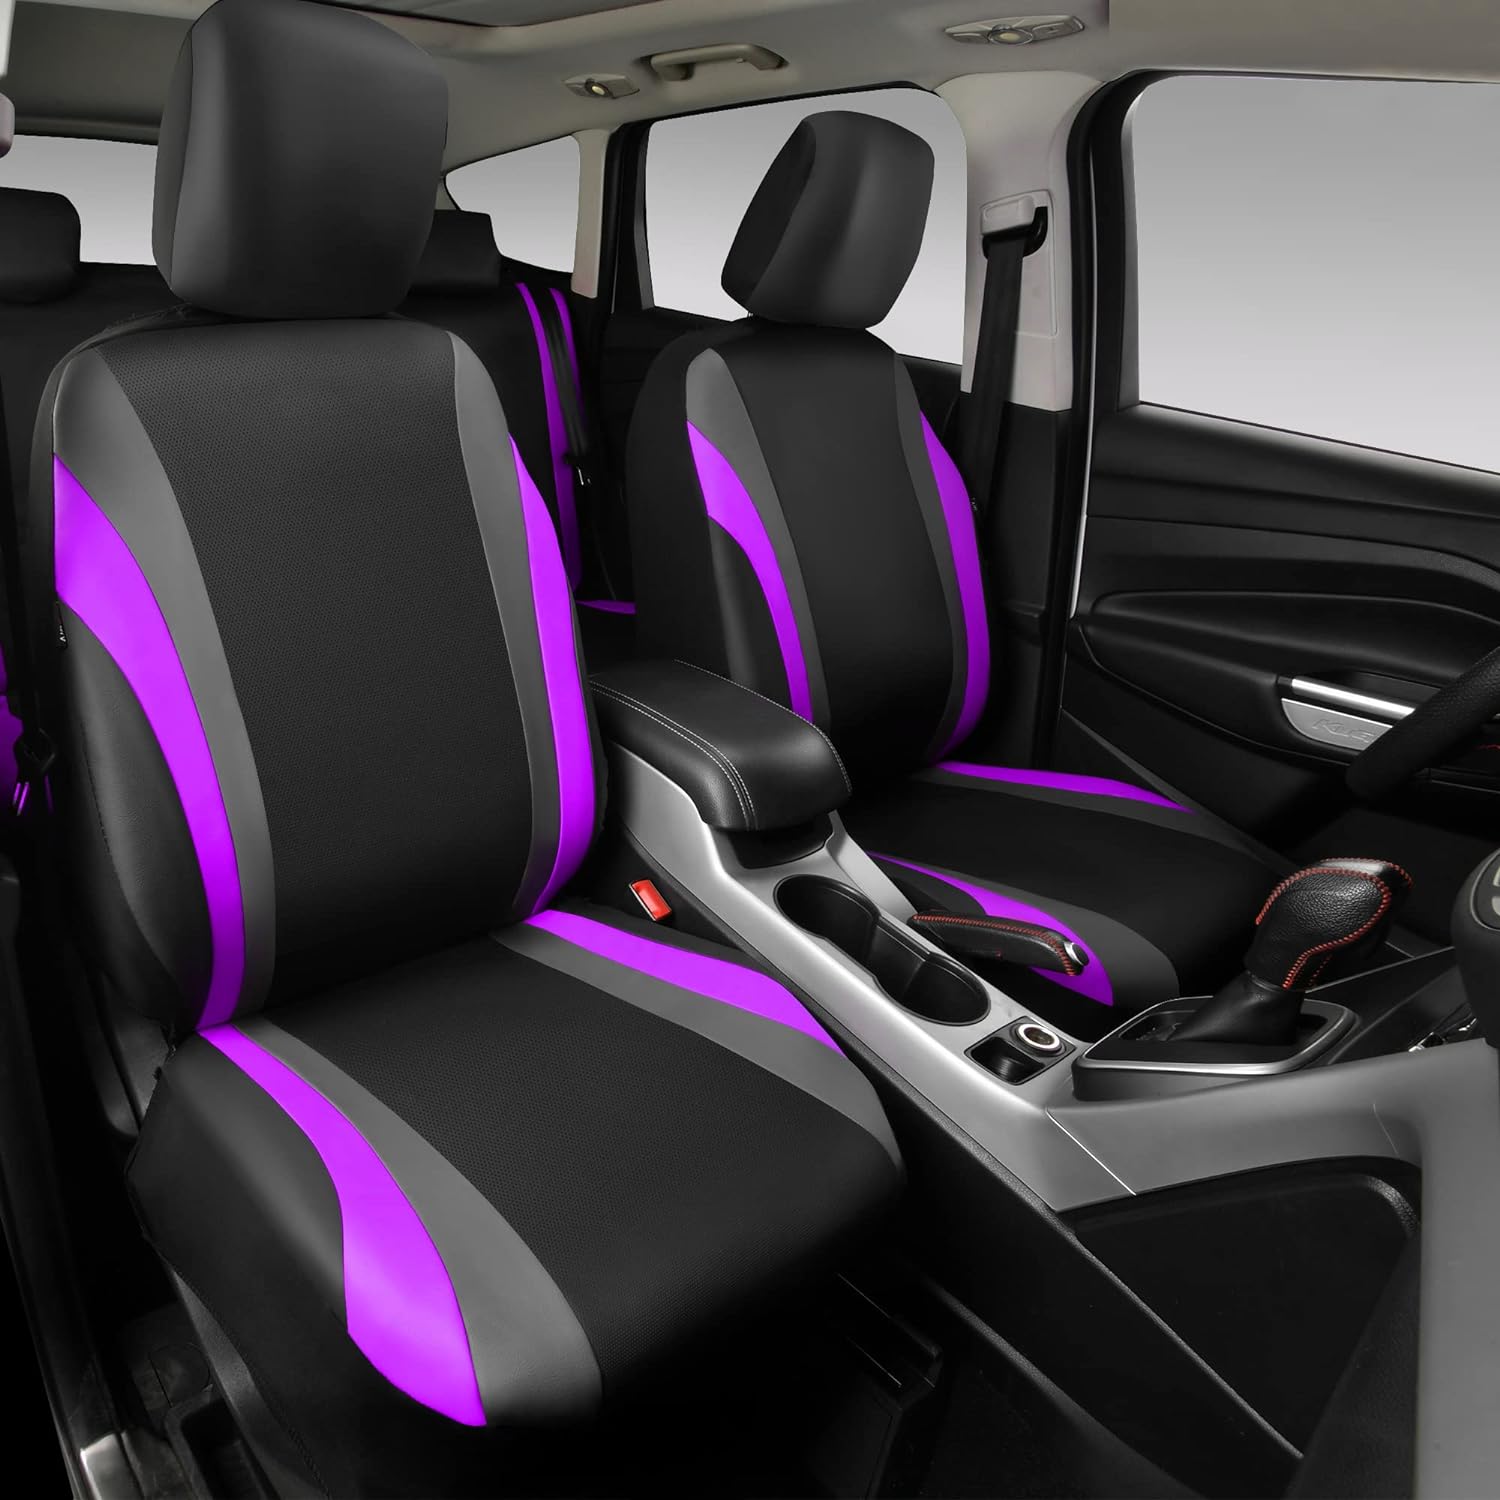 CAR PASS Line Rider Leather Car Seat Cover and Steering Wheel Cover Combo Fits for 95% Truck, SUV, Sedan. 14.5-15 Inch Anti-Slip Desgin. 3 Zipper Bench. (Black and Purple)